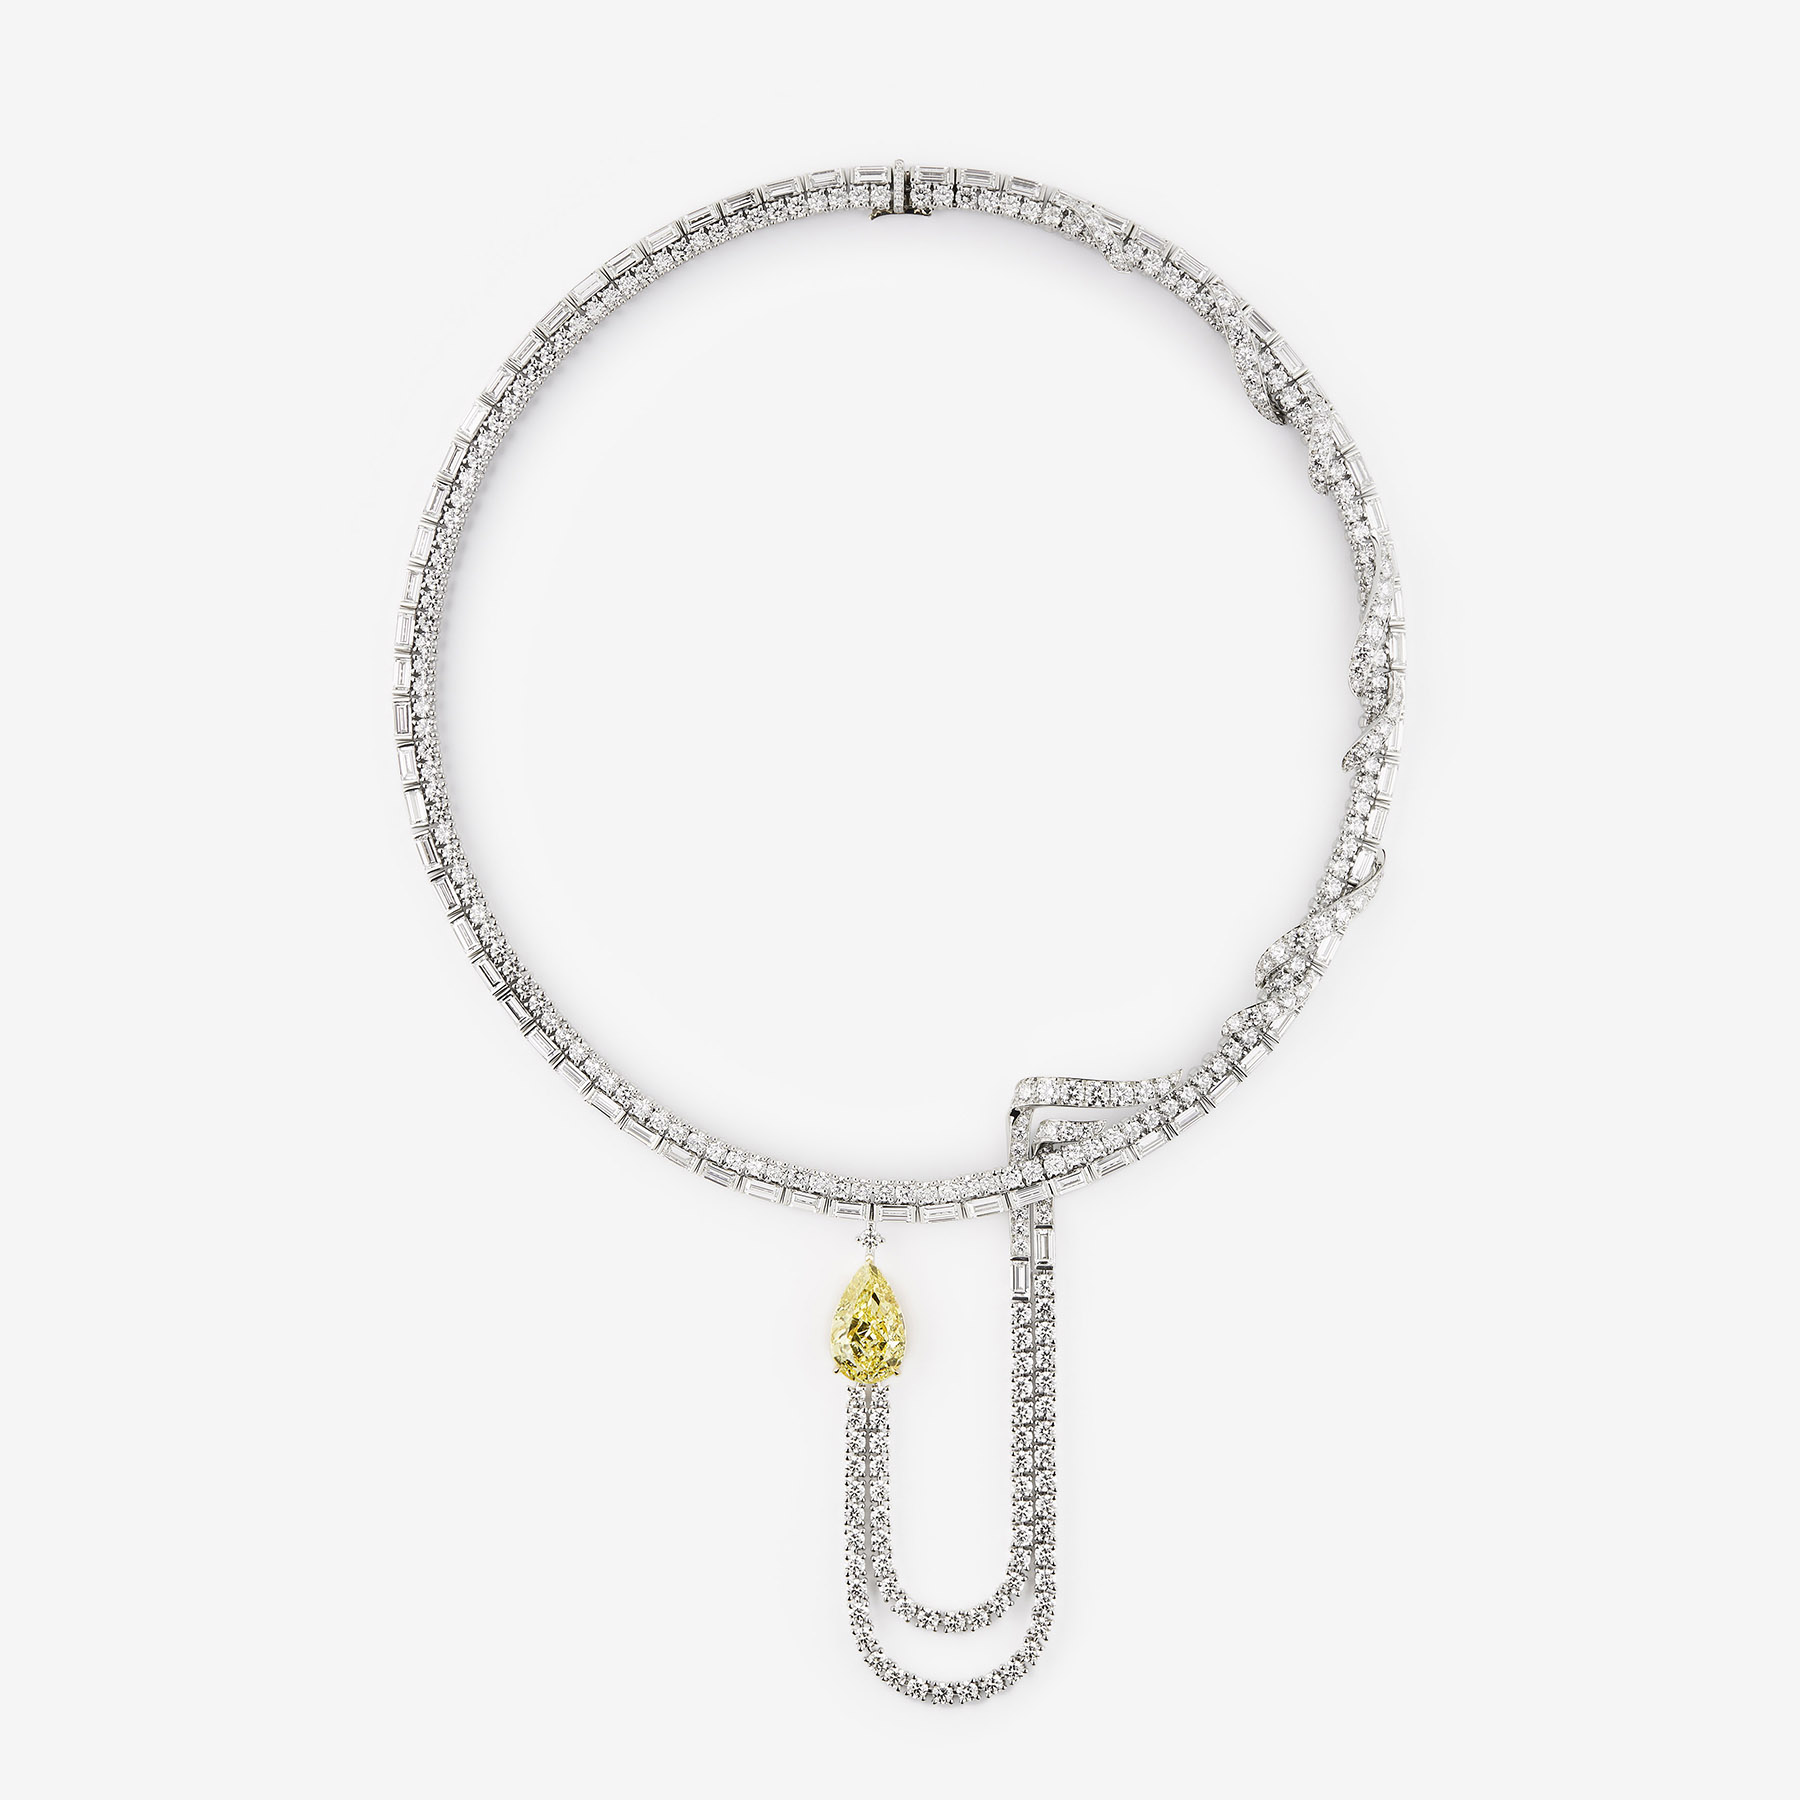 Platinum and Yellow Gold Necklace Set with an Yellow Pear-Shaped Diamond